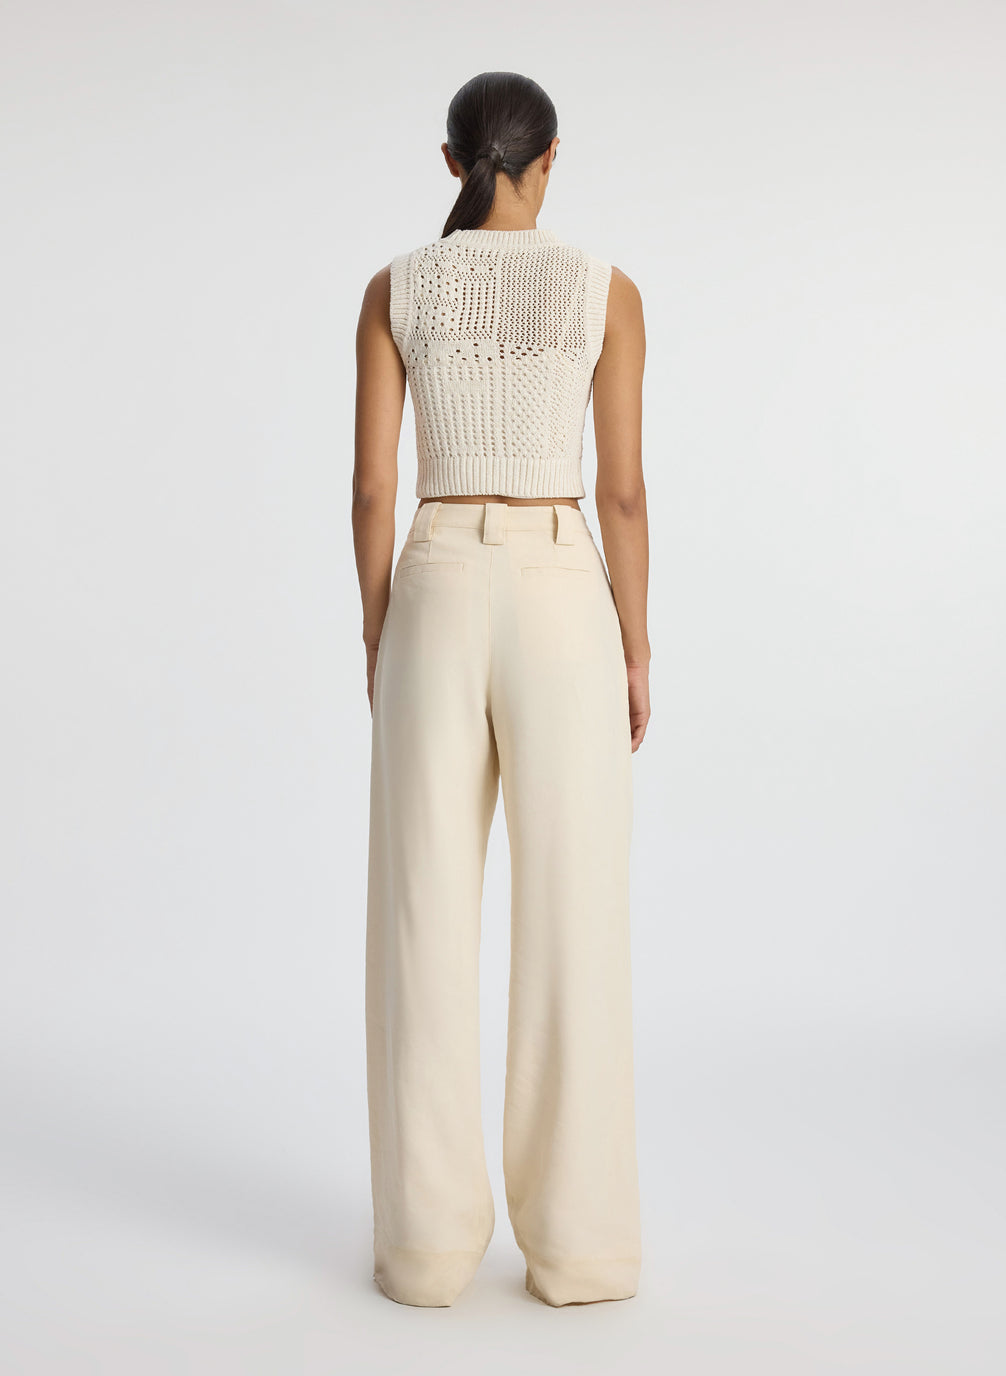 back view of woman wearing cream sleeveless cropped crochet top and beige pants